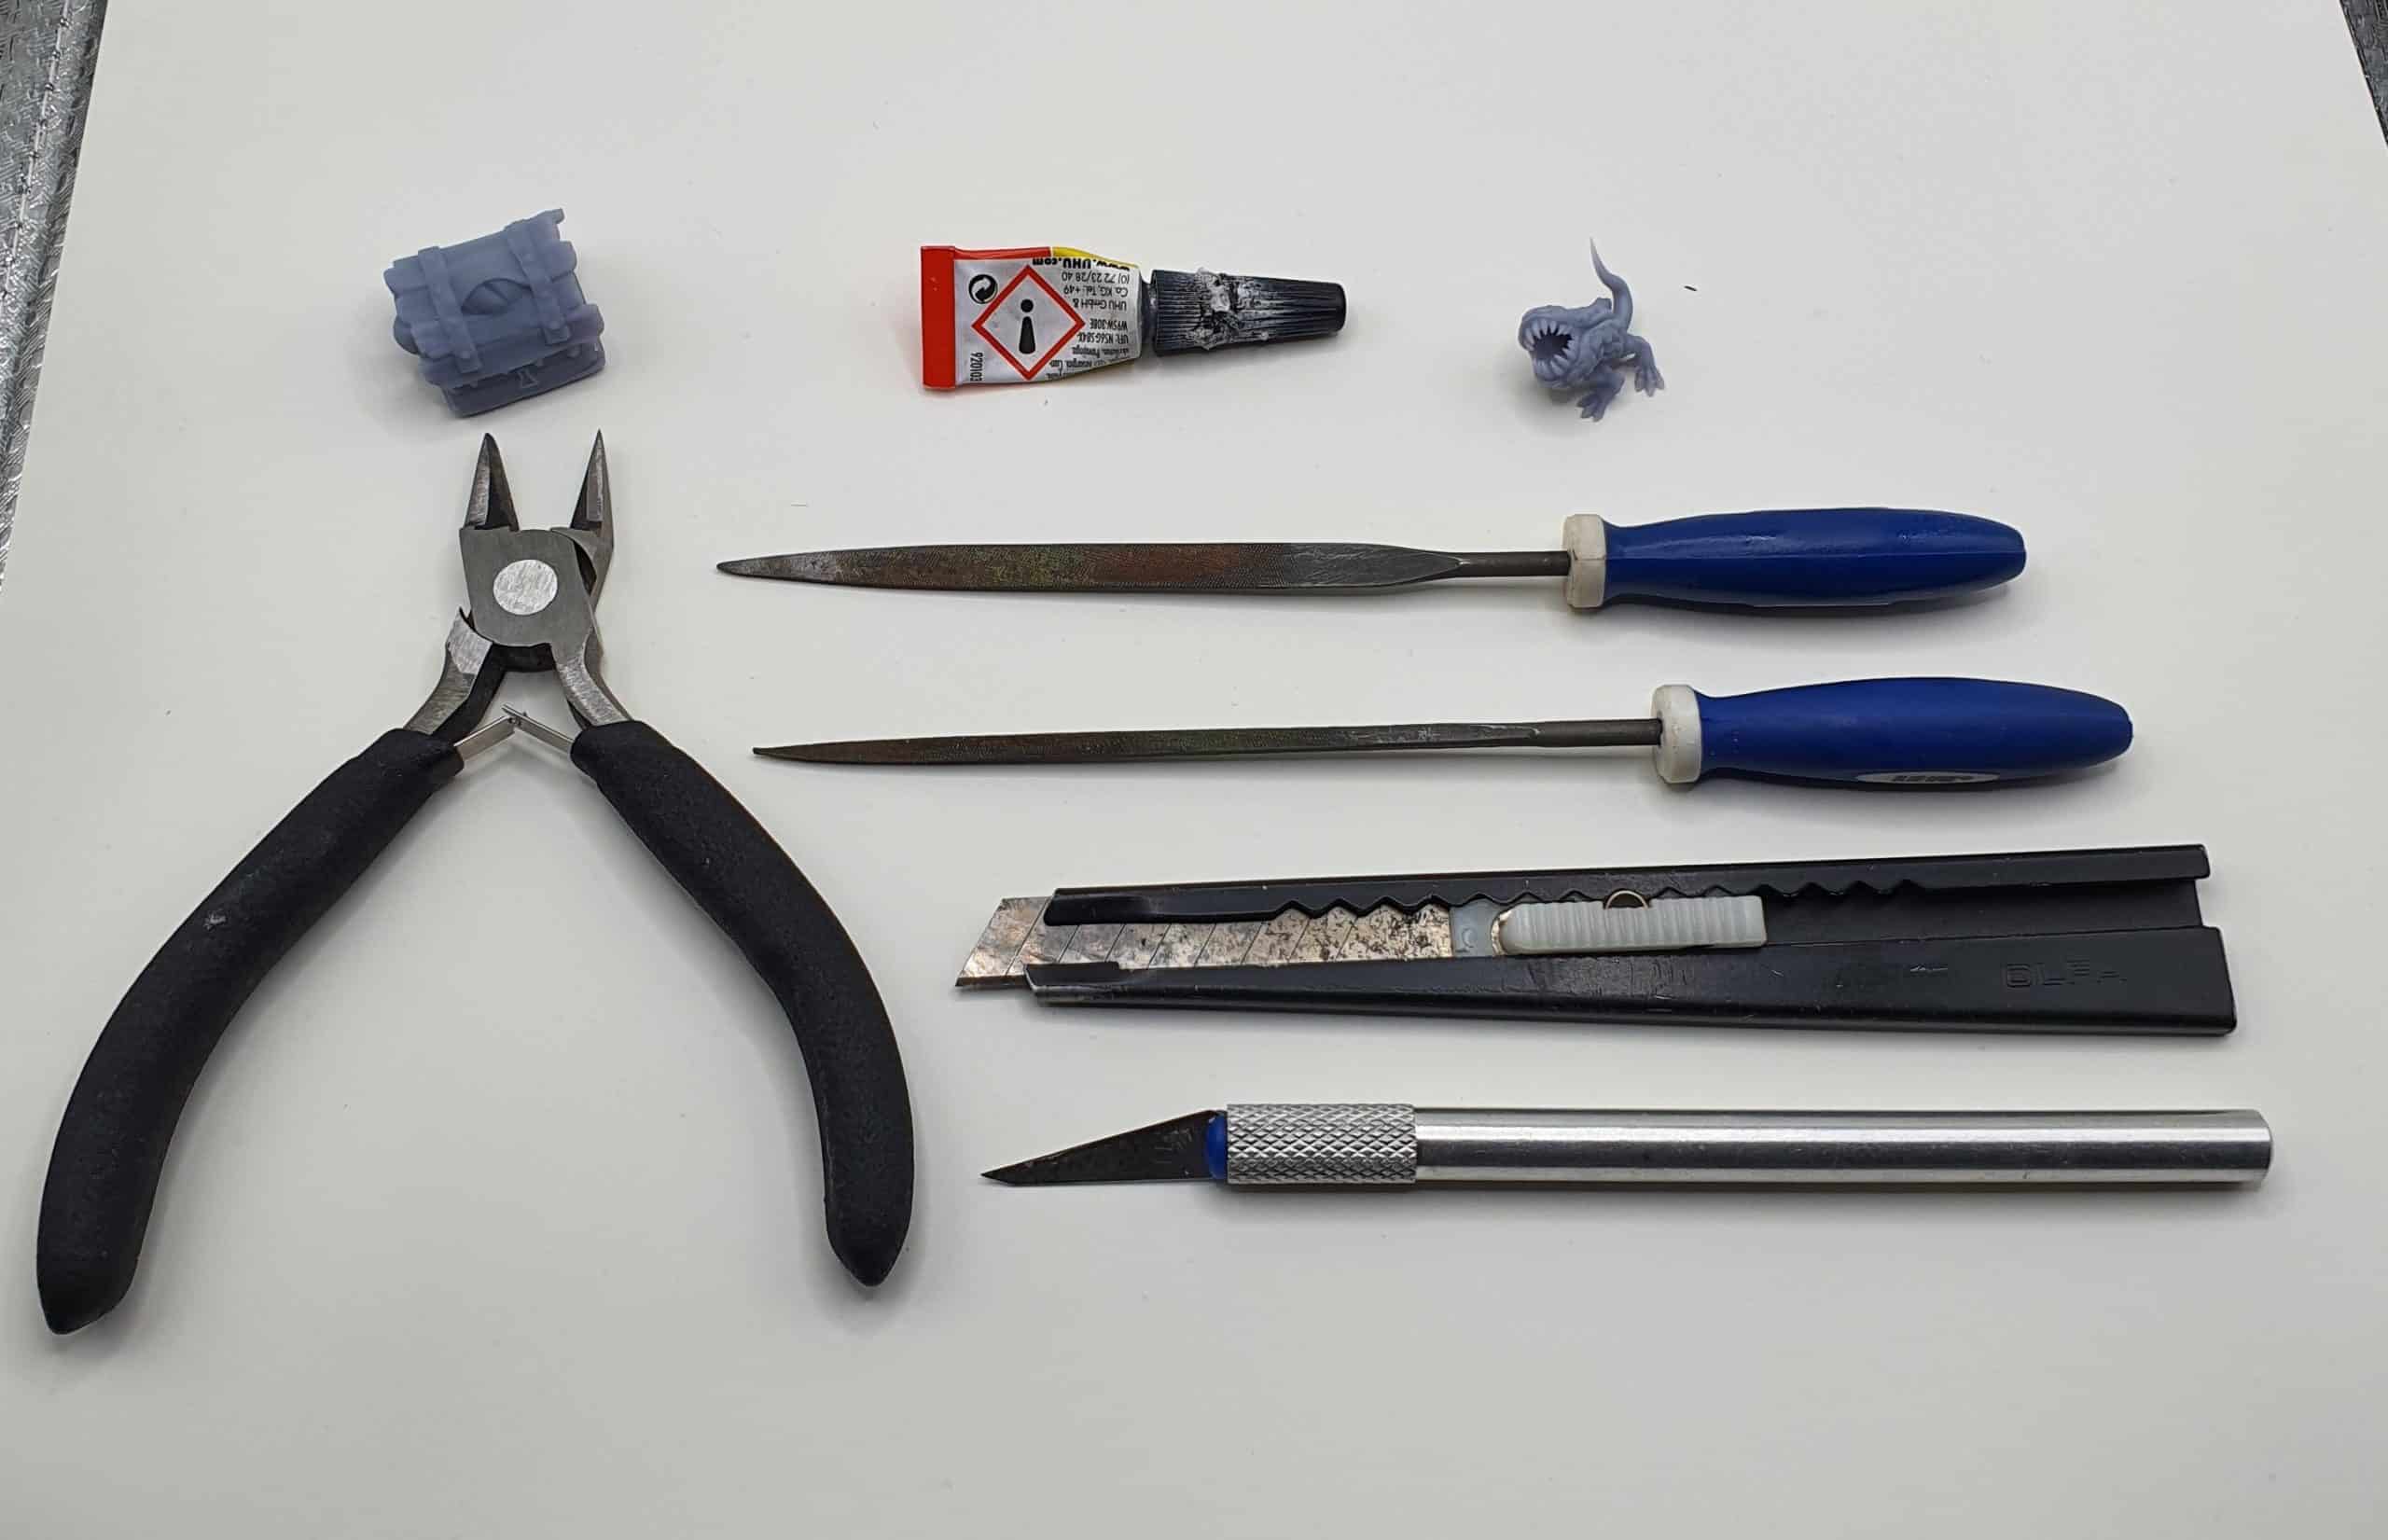 A Selection of 3D Printing tools for post processing. Clippers, files, a knife and the all important glue.